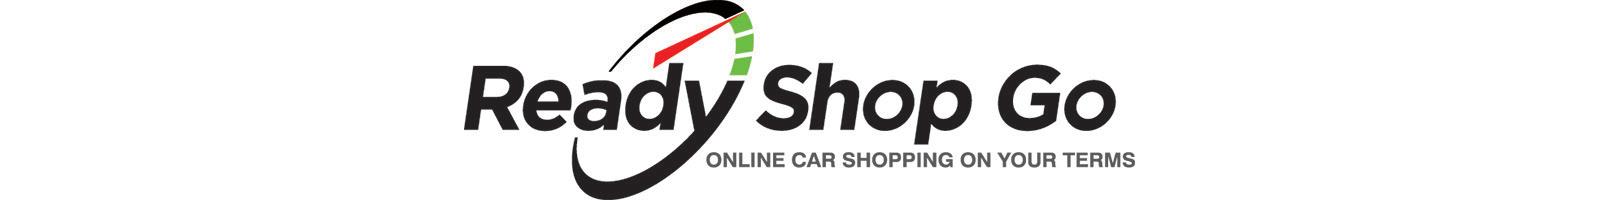 Ready Shop Go online Car Shopping On Your Terms